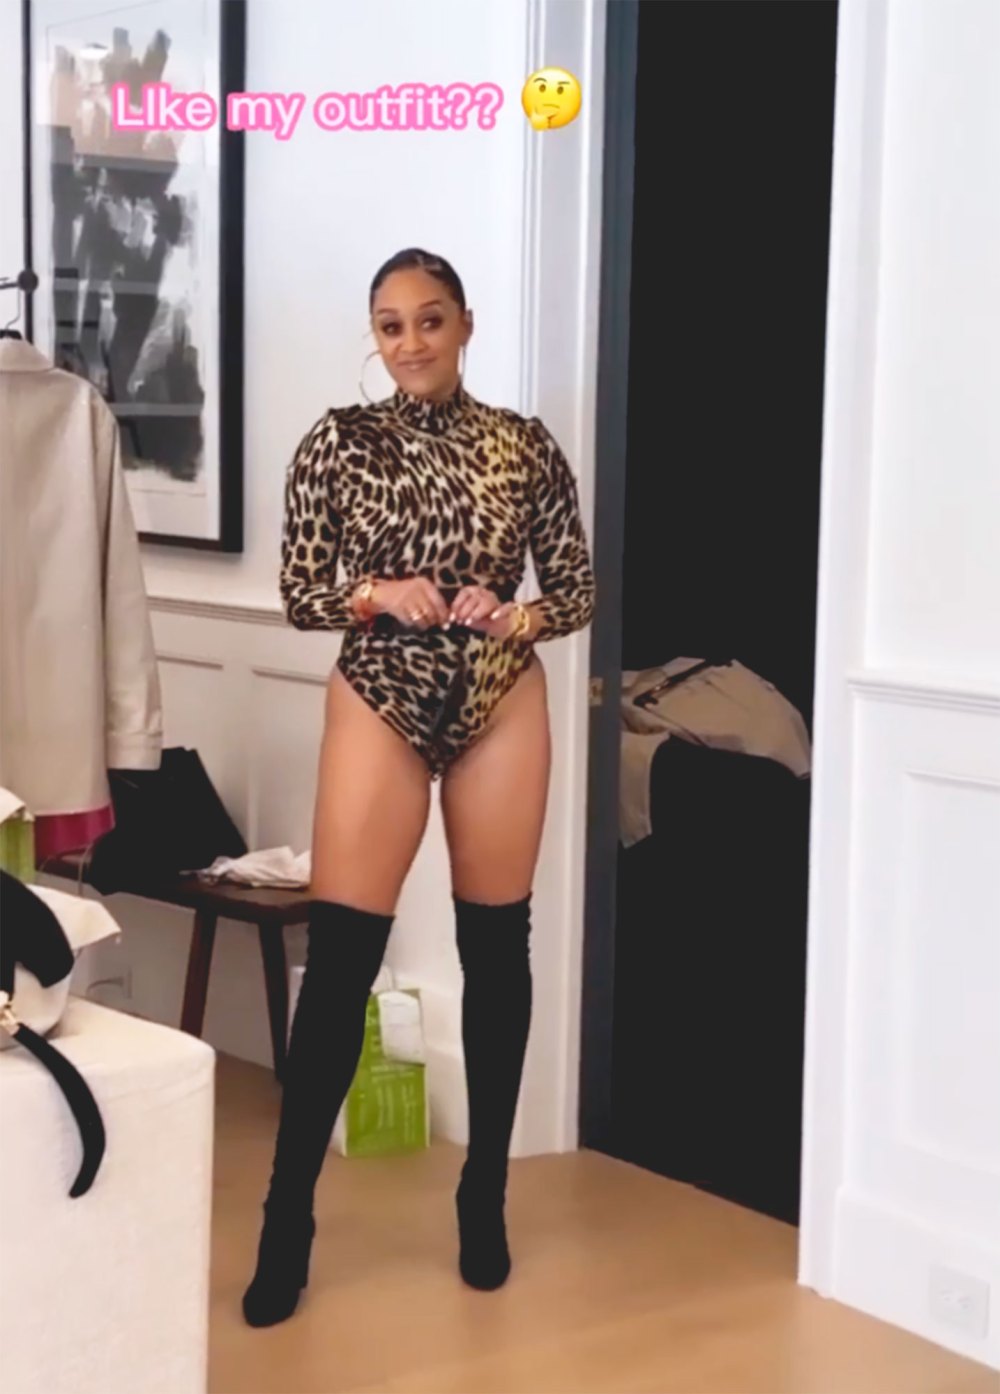 Tia Mowry’s son poking fun at her outfit leopard leotard